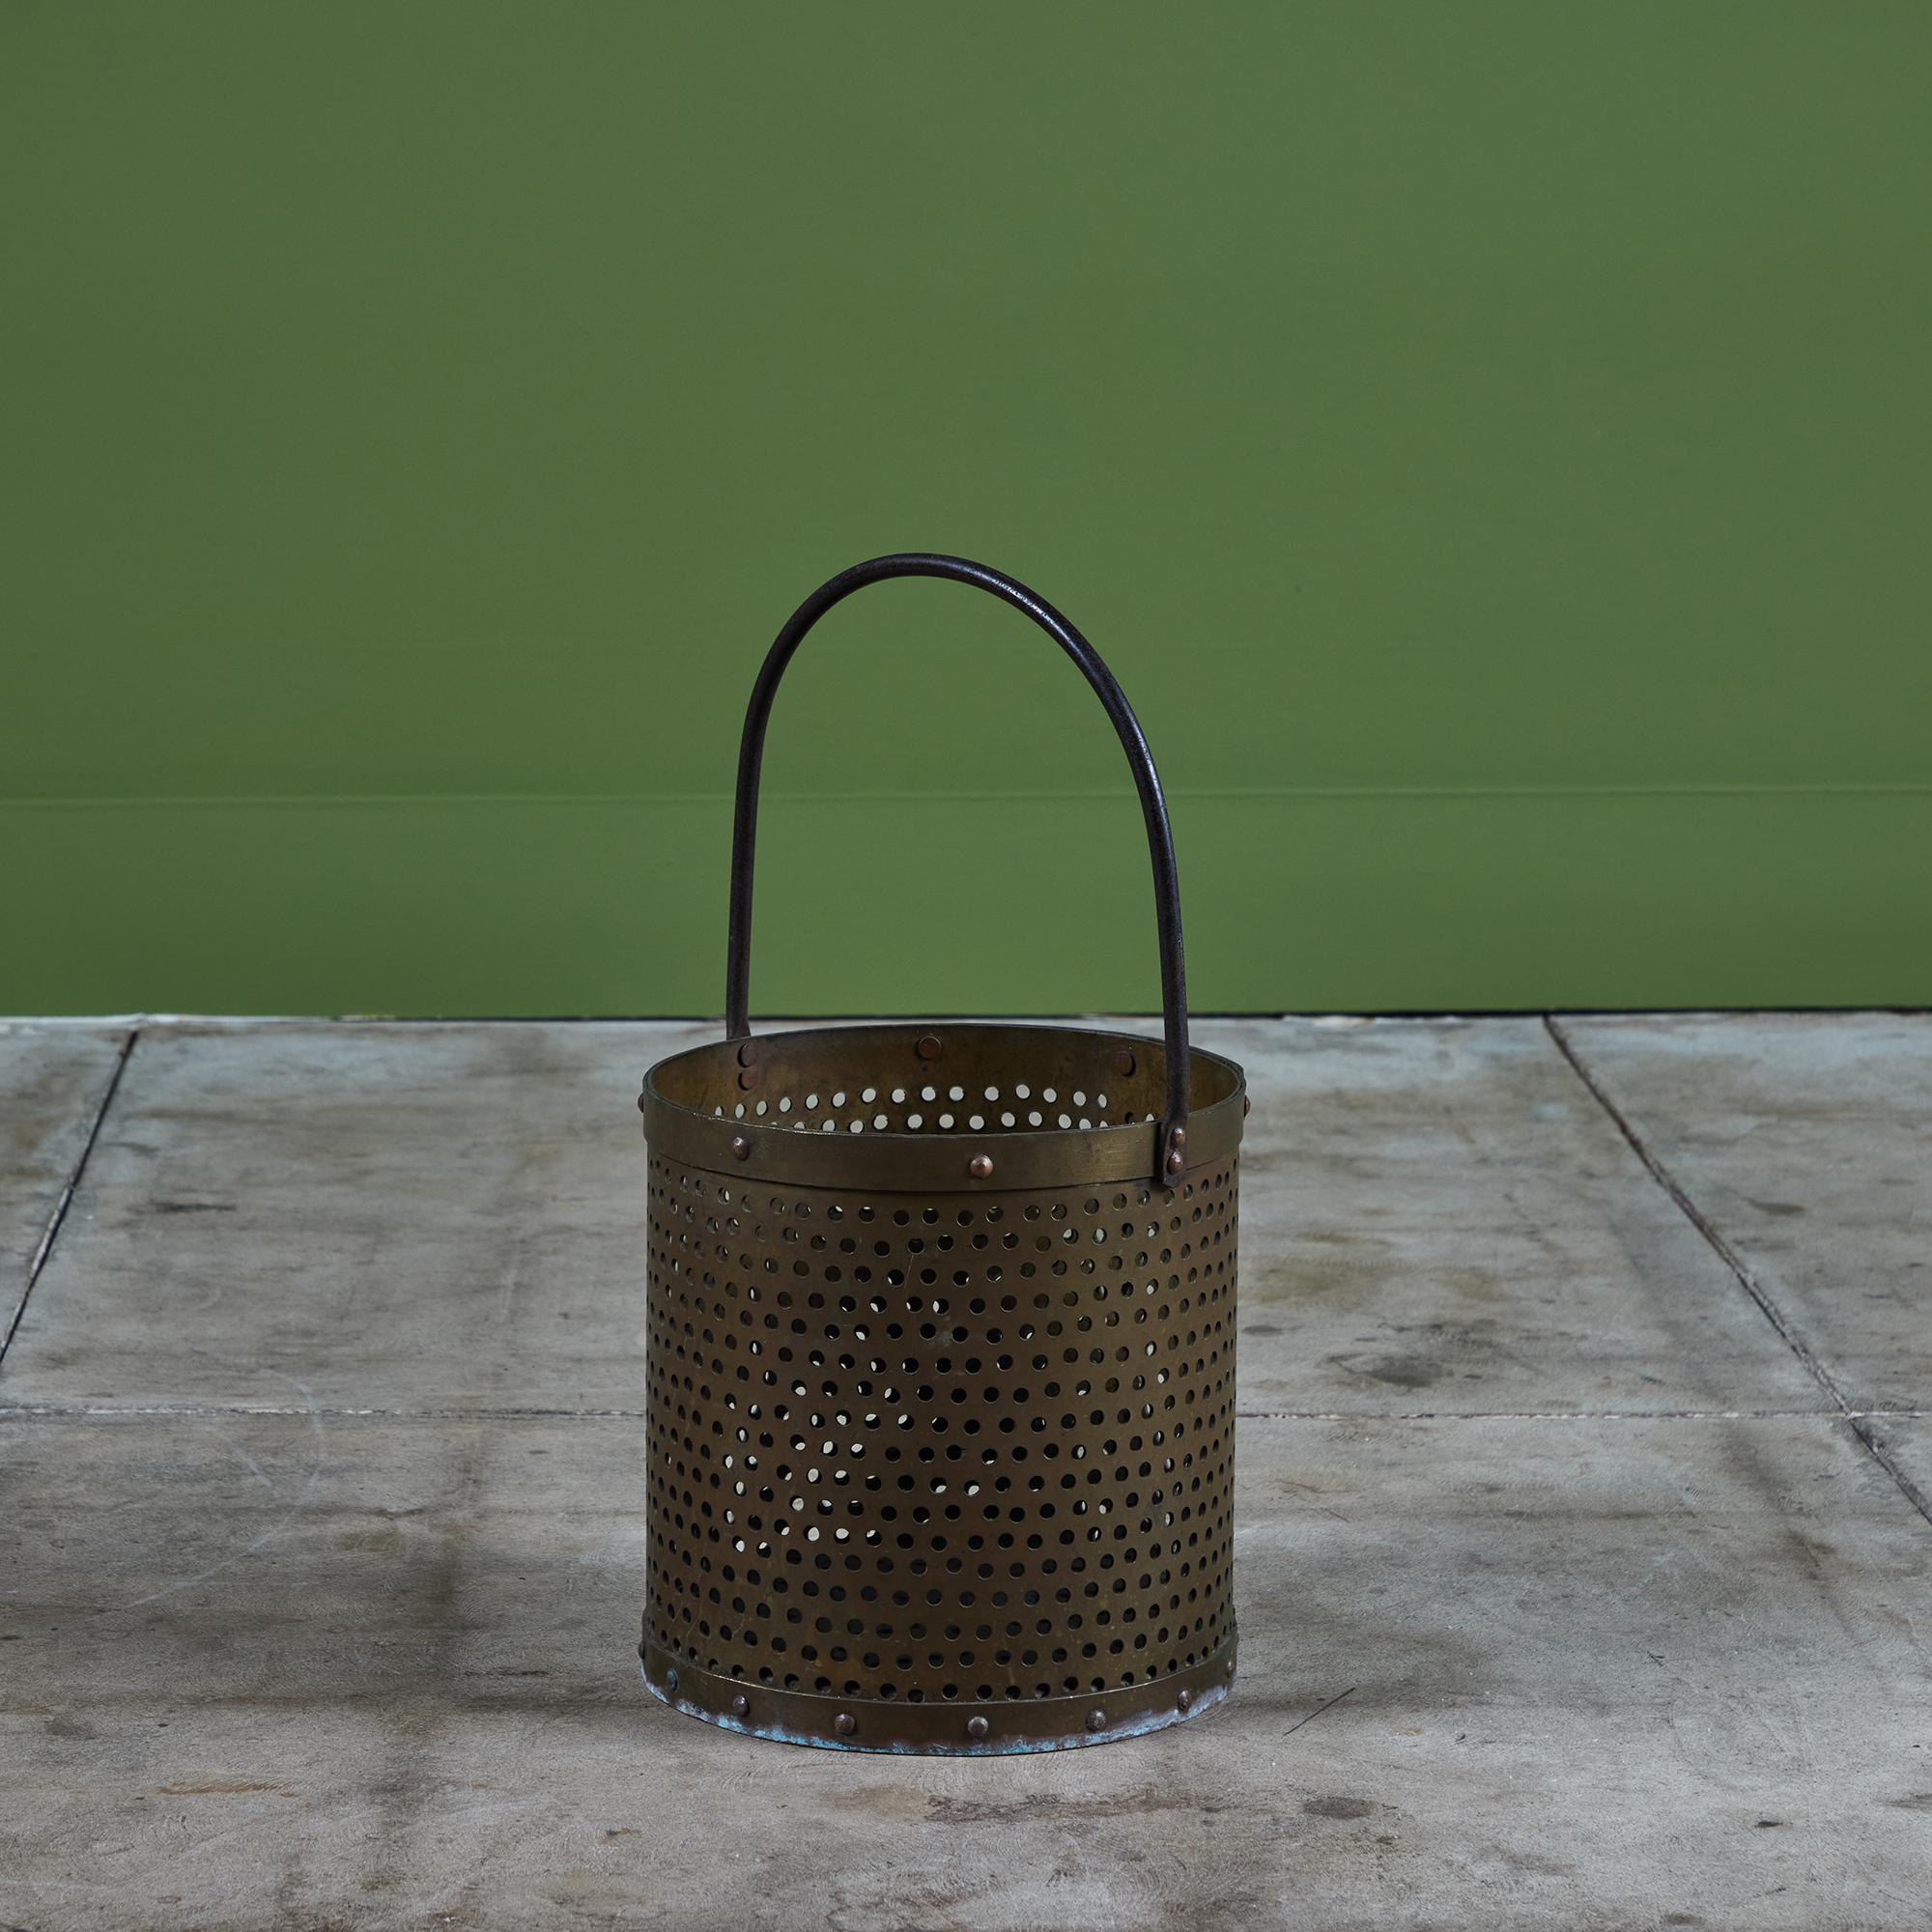 Brass pail with curved handle. This piece features a round perforated body with rivets at both the top and bottom of the pail. It would be a great décor piece or waste basket.

Dimensions
10.5